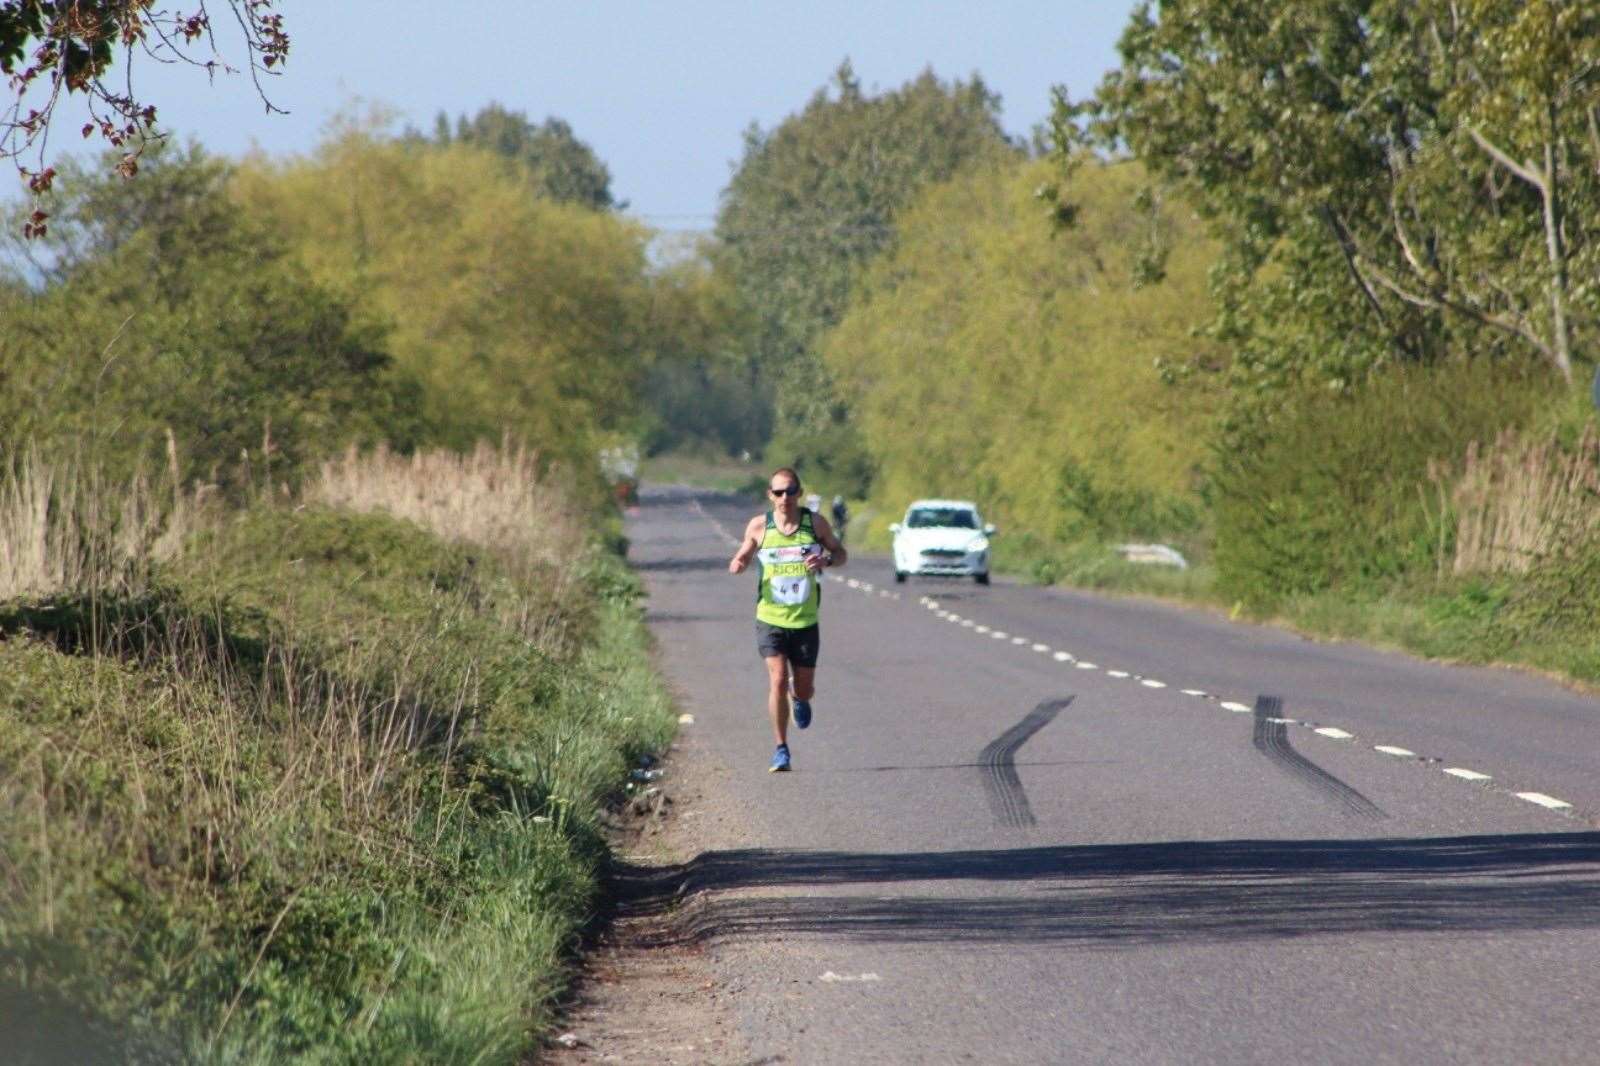 Richard 'Richie' Mills celebrating his 40th birthday by running a marathon along the Sheppey Way at Iwade in aid of Allergy UK